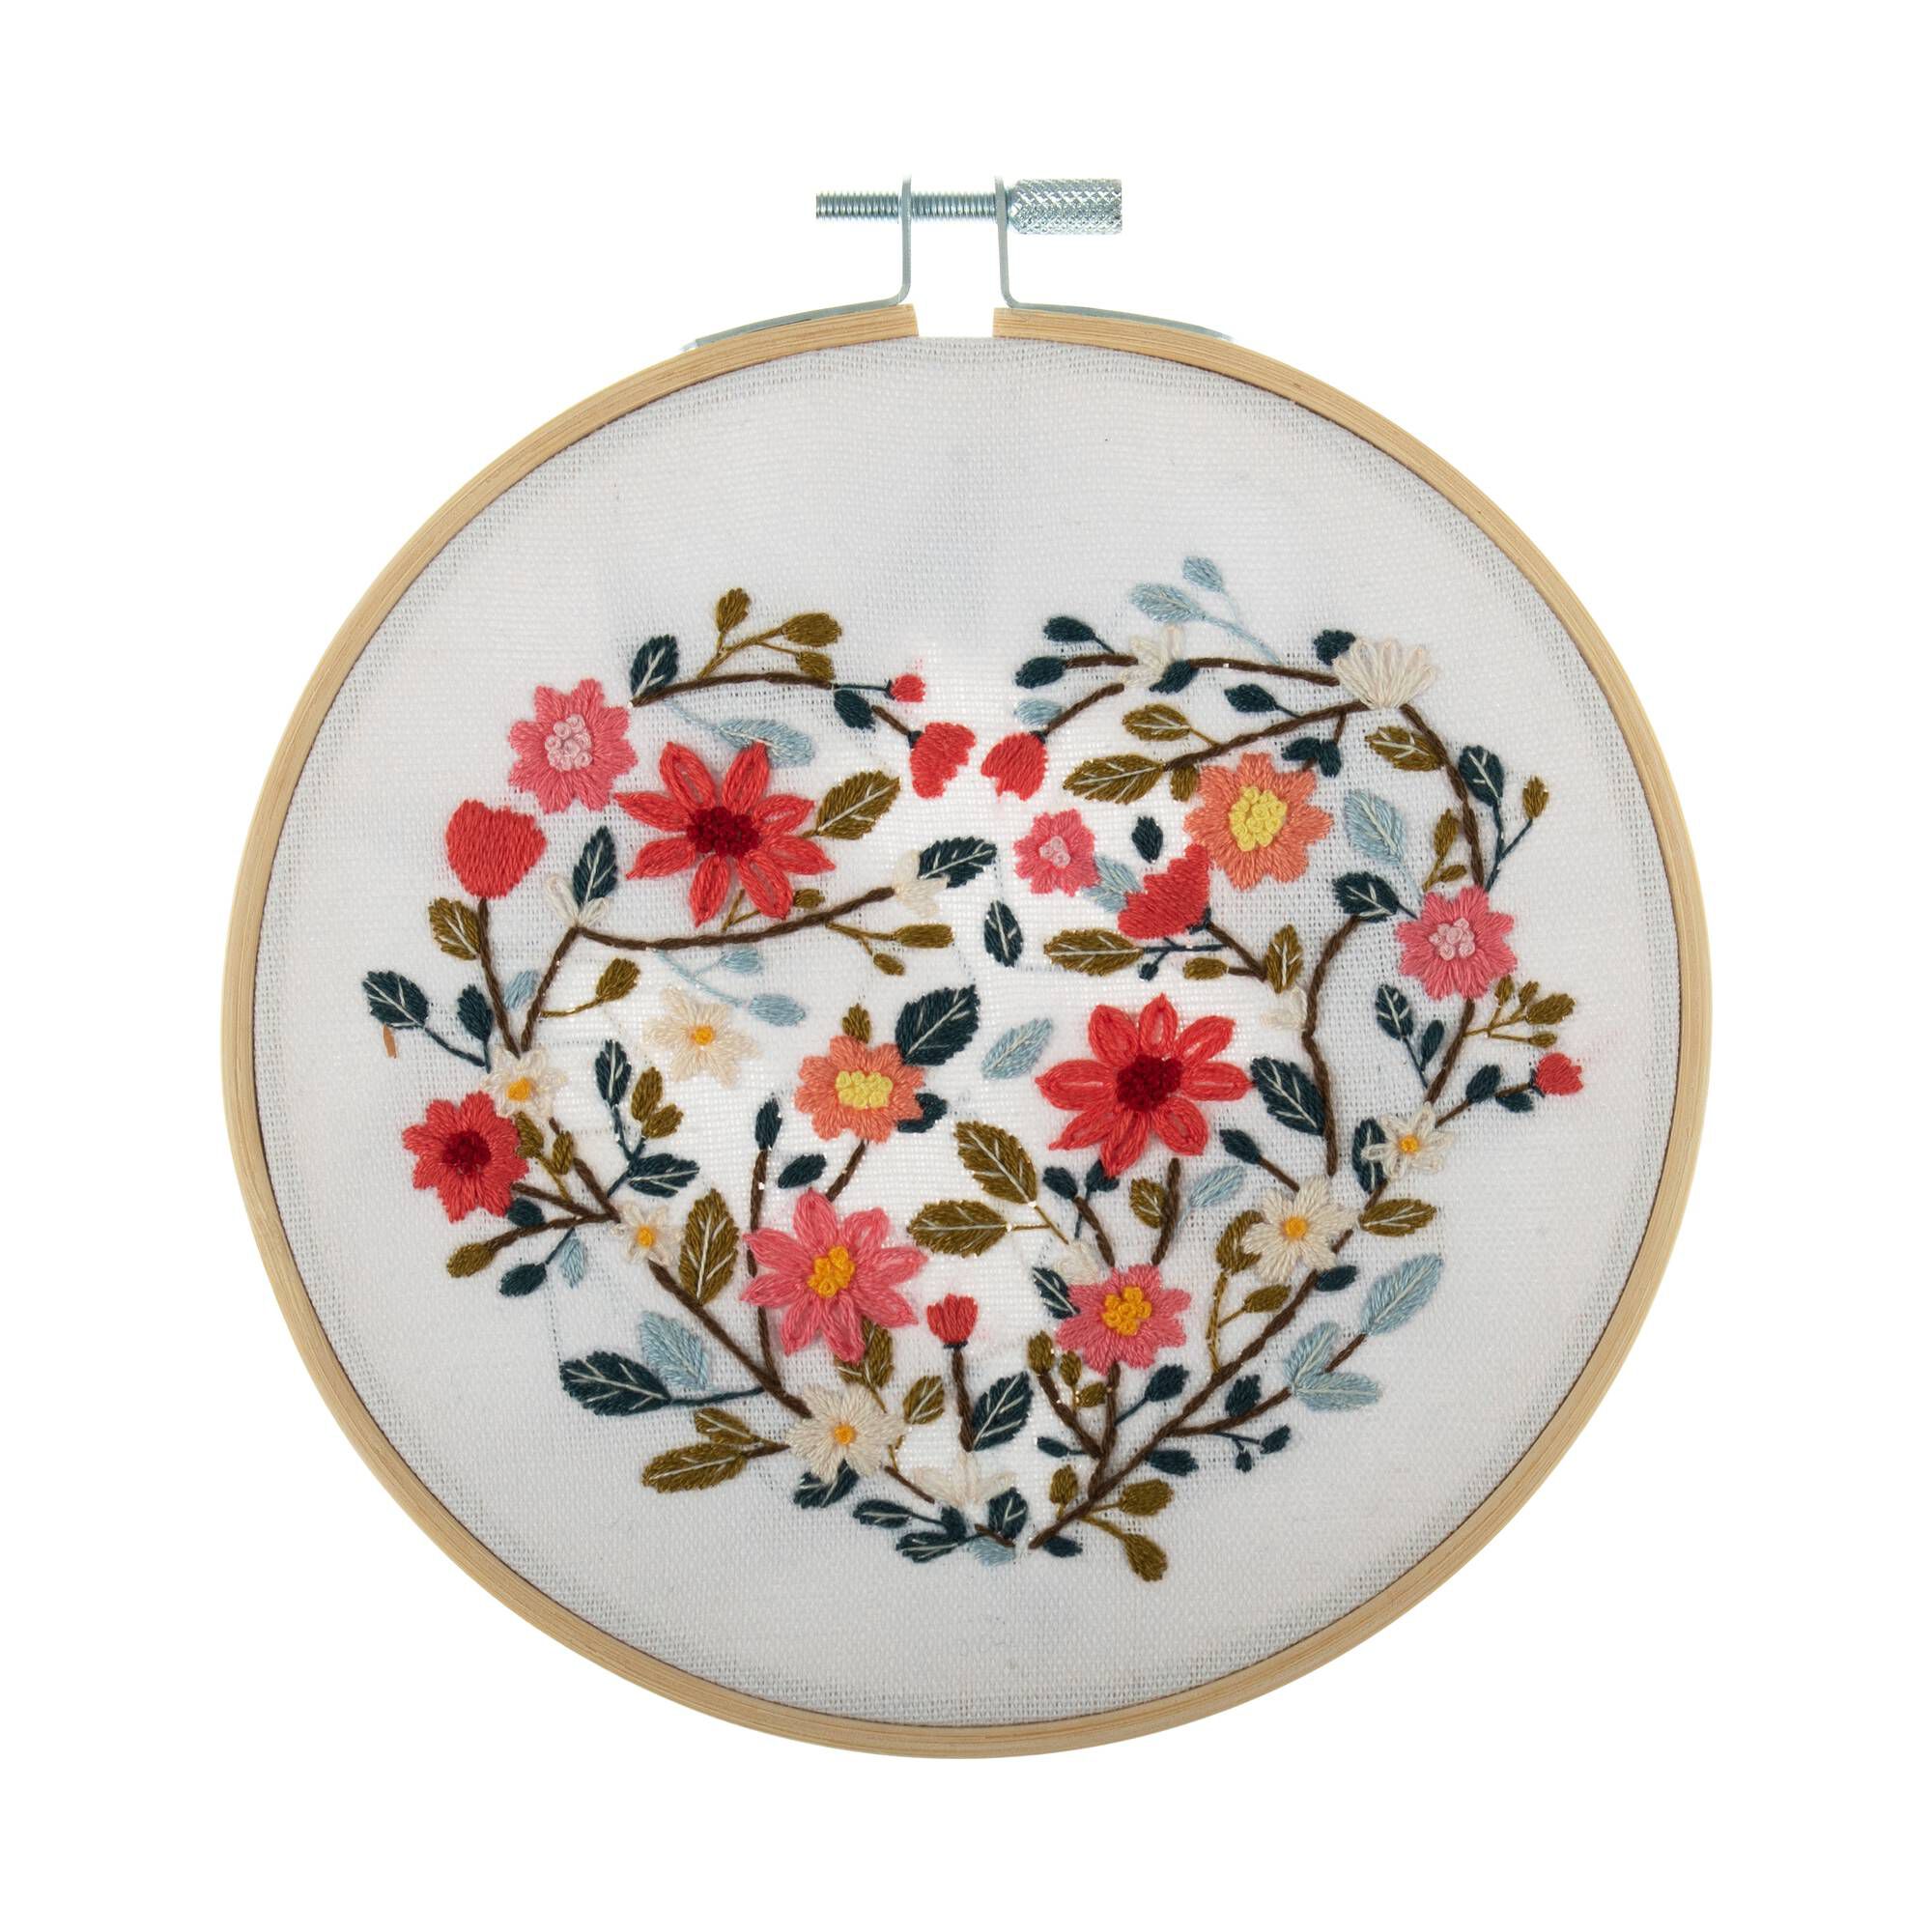 Trimits Floral Heart Embroidery Hoop Kit | Hobbycraft